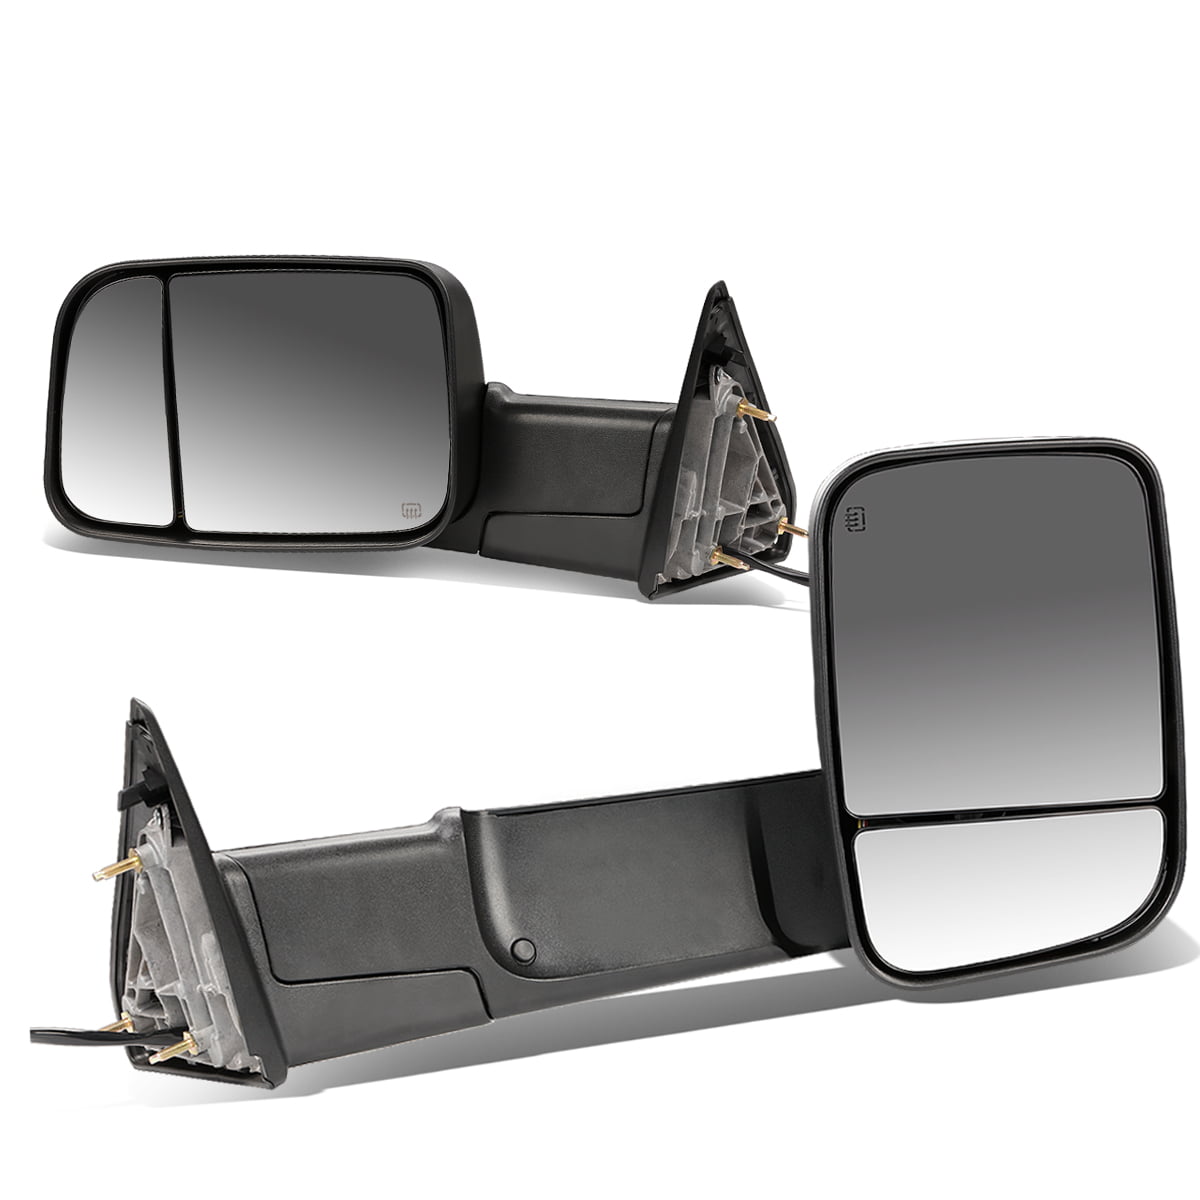 Black For Dodge Ram BR/BE Pair of 90 Degree Adjustable Rear View Manual Folding Towing Side Mirror 